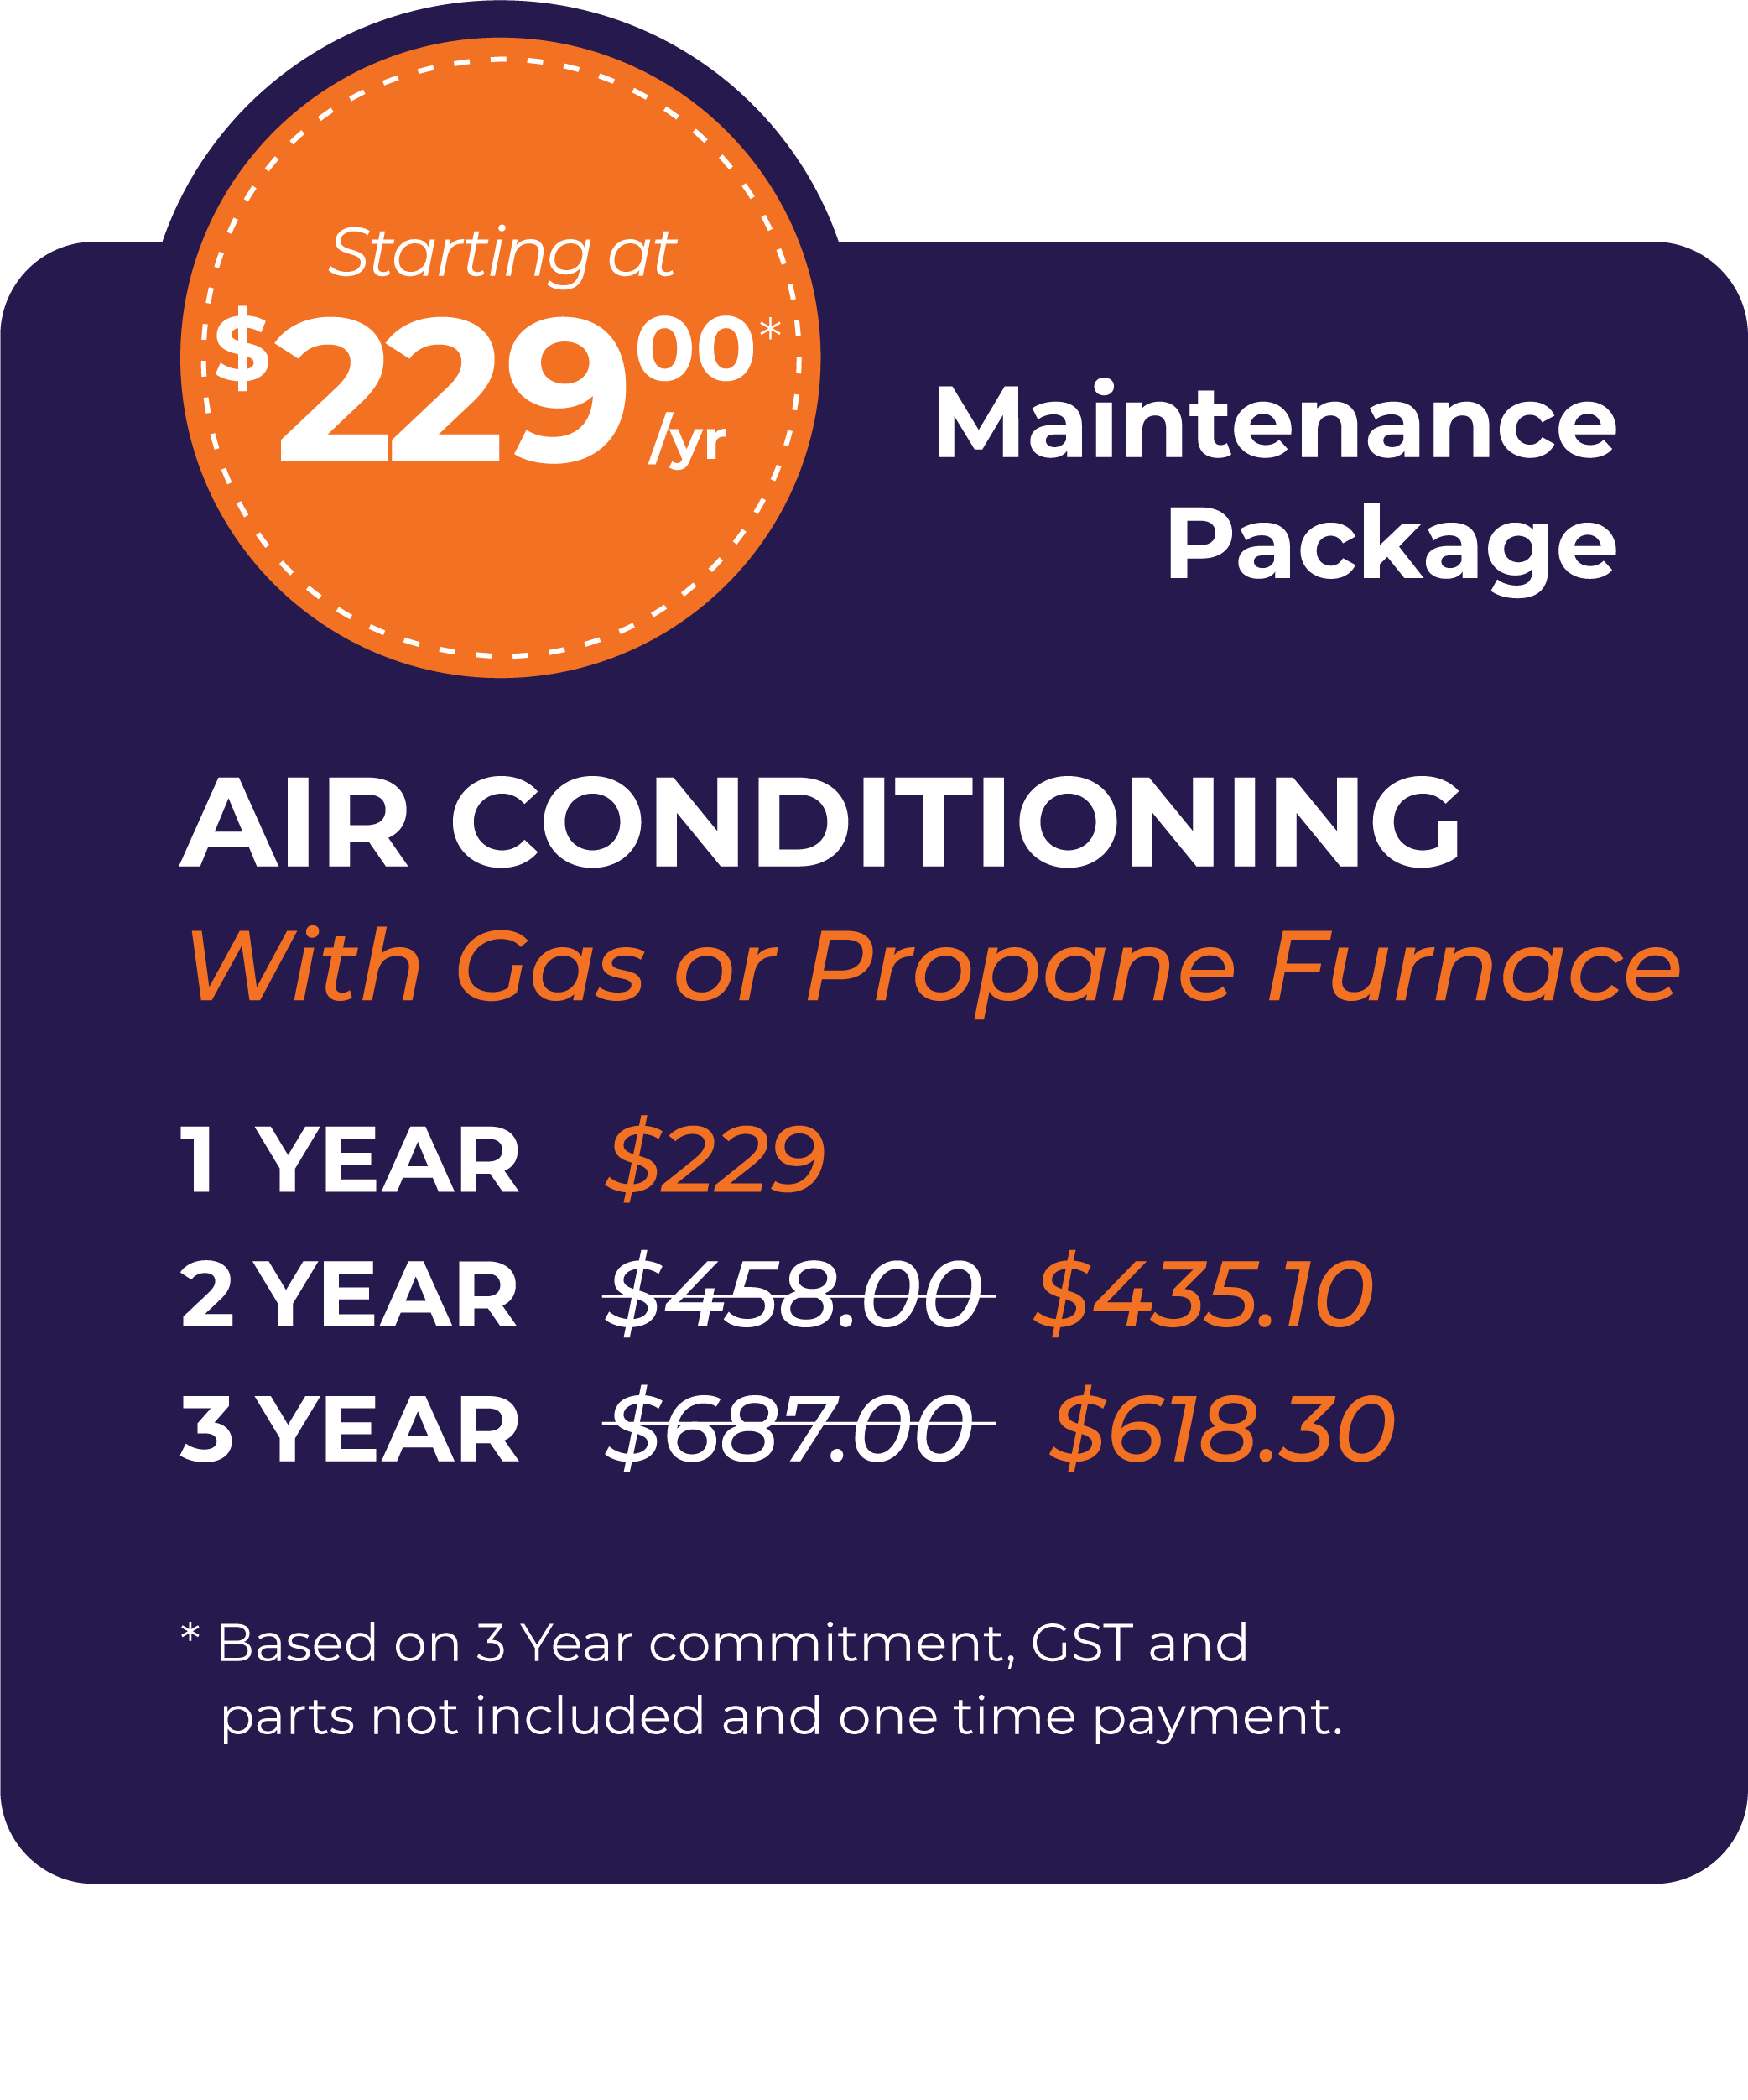 Air Conditioning with gas or propane furnace package